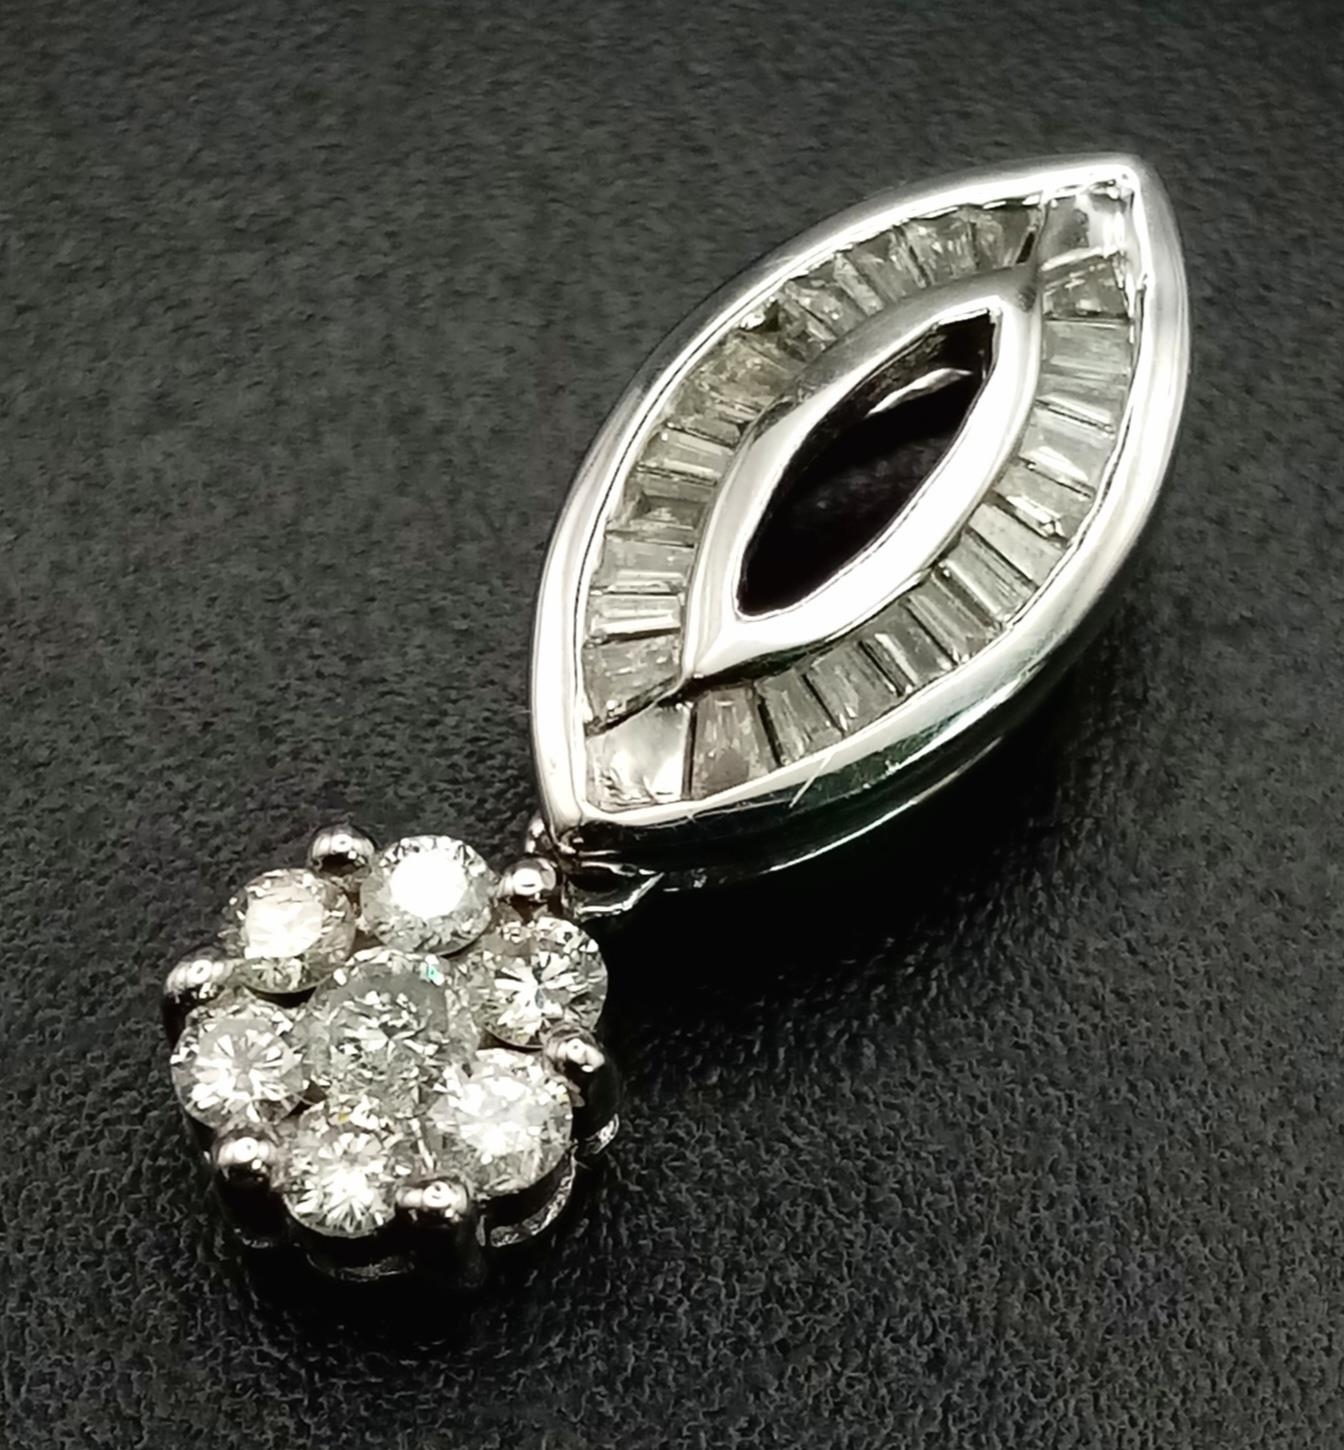 An 18 K pendant with baguette and round cut diamonds (0.40 carats). Length: 19 mm, weight: 1.7 g.